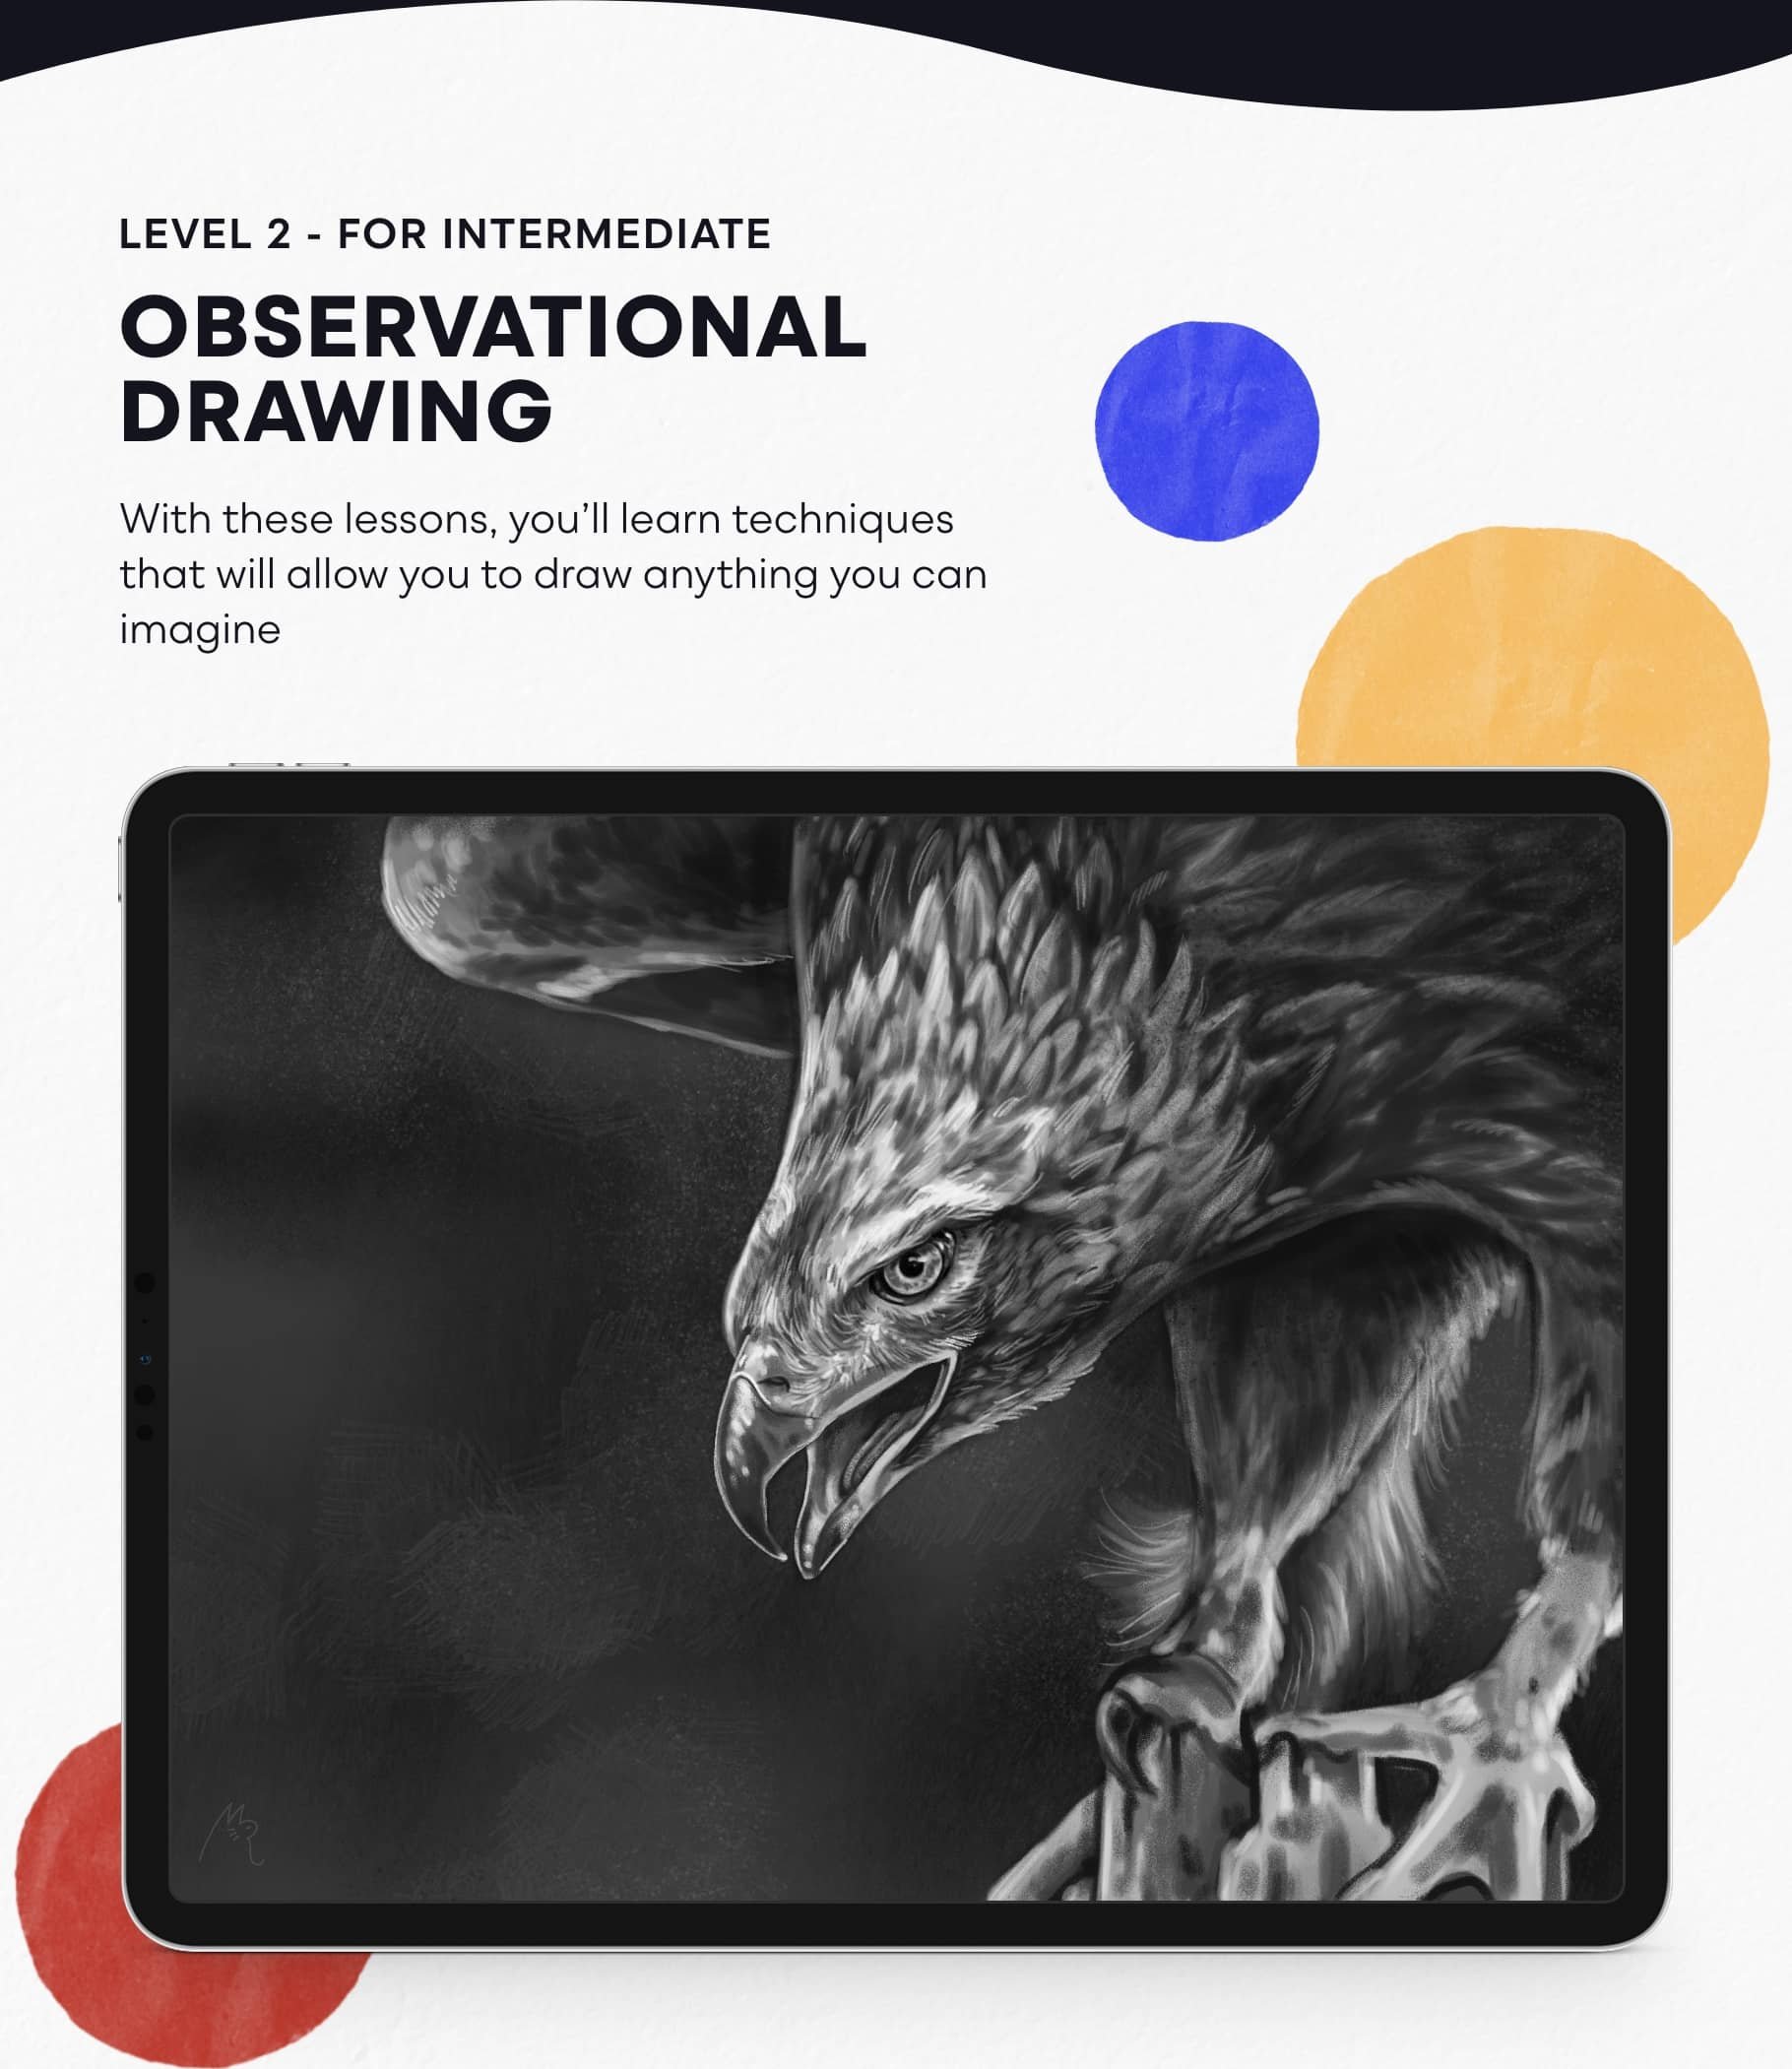 Learn To Draw: A Beginner's Guide To Sketching Anything! - Design Cuts